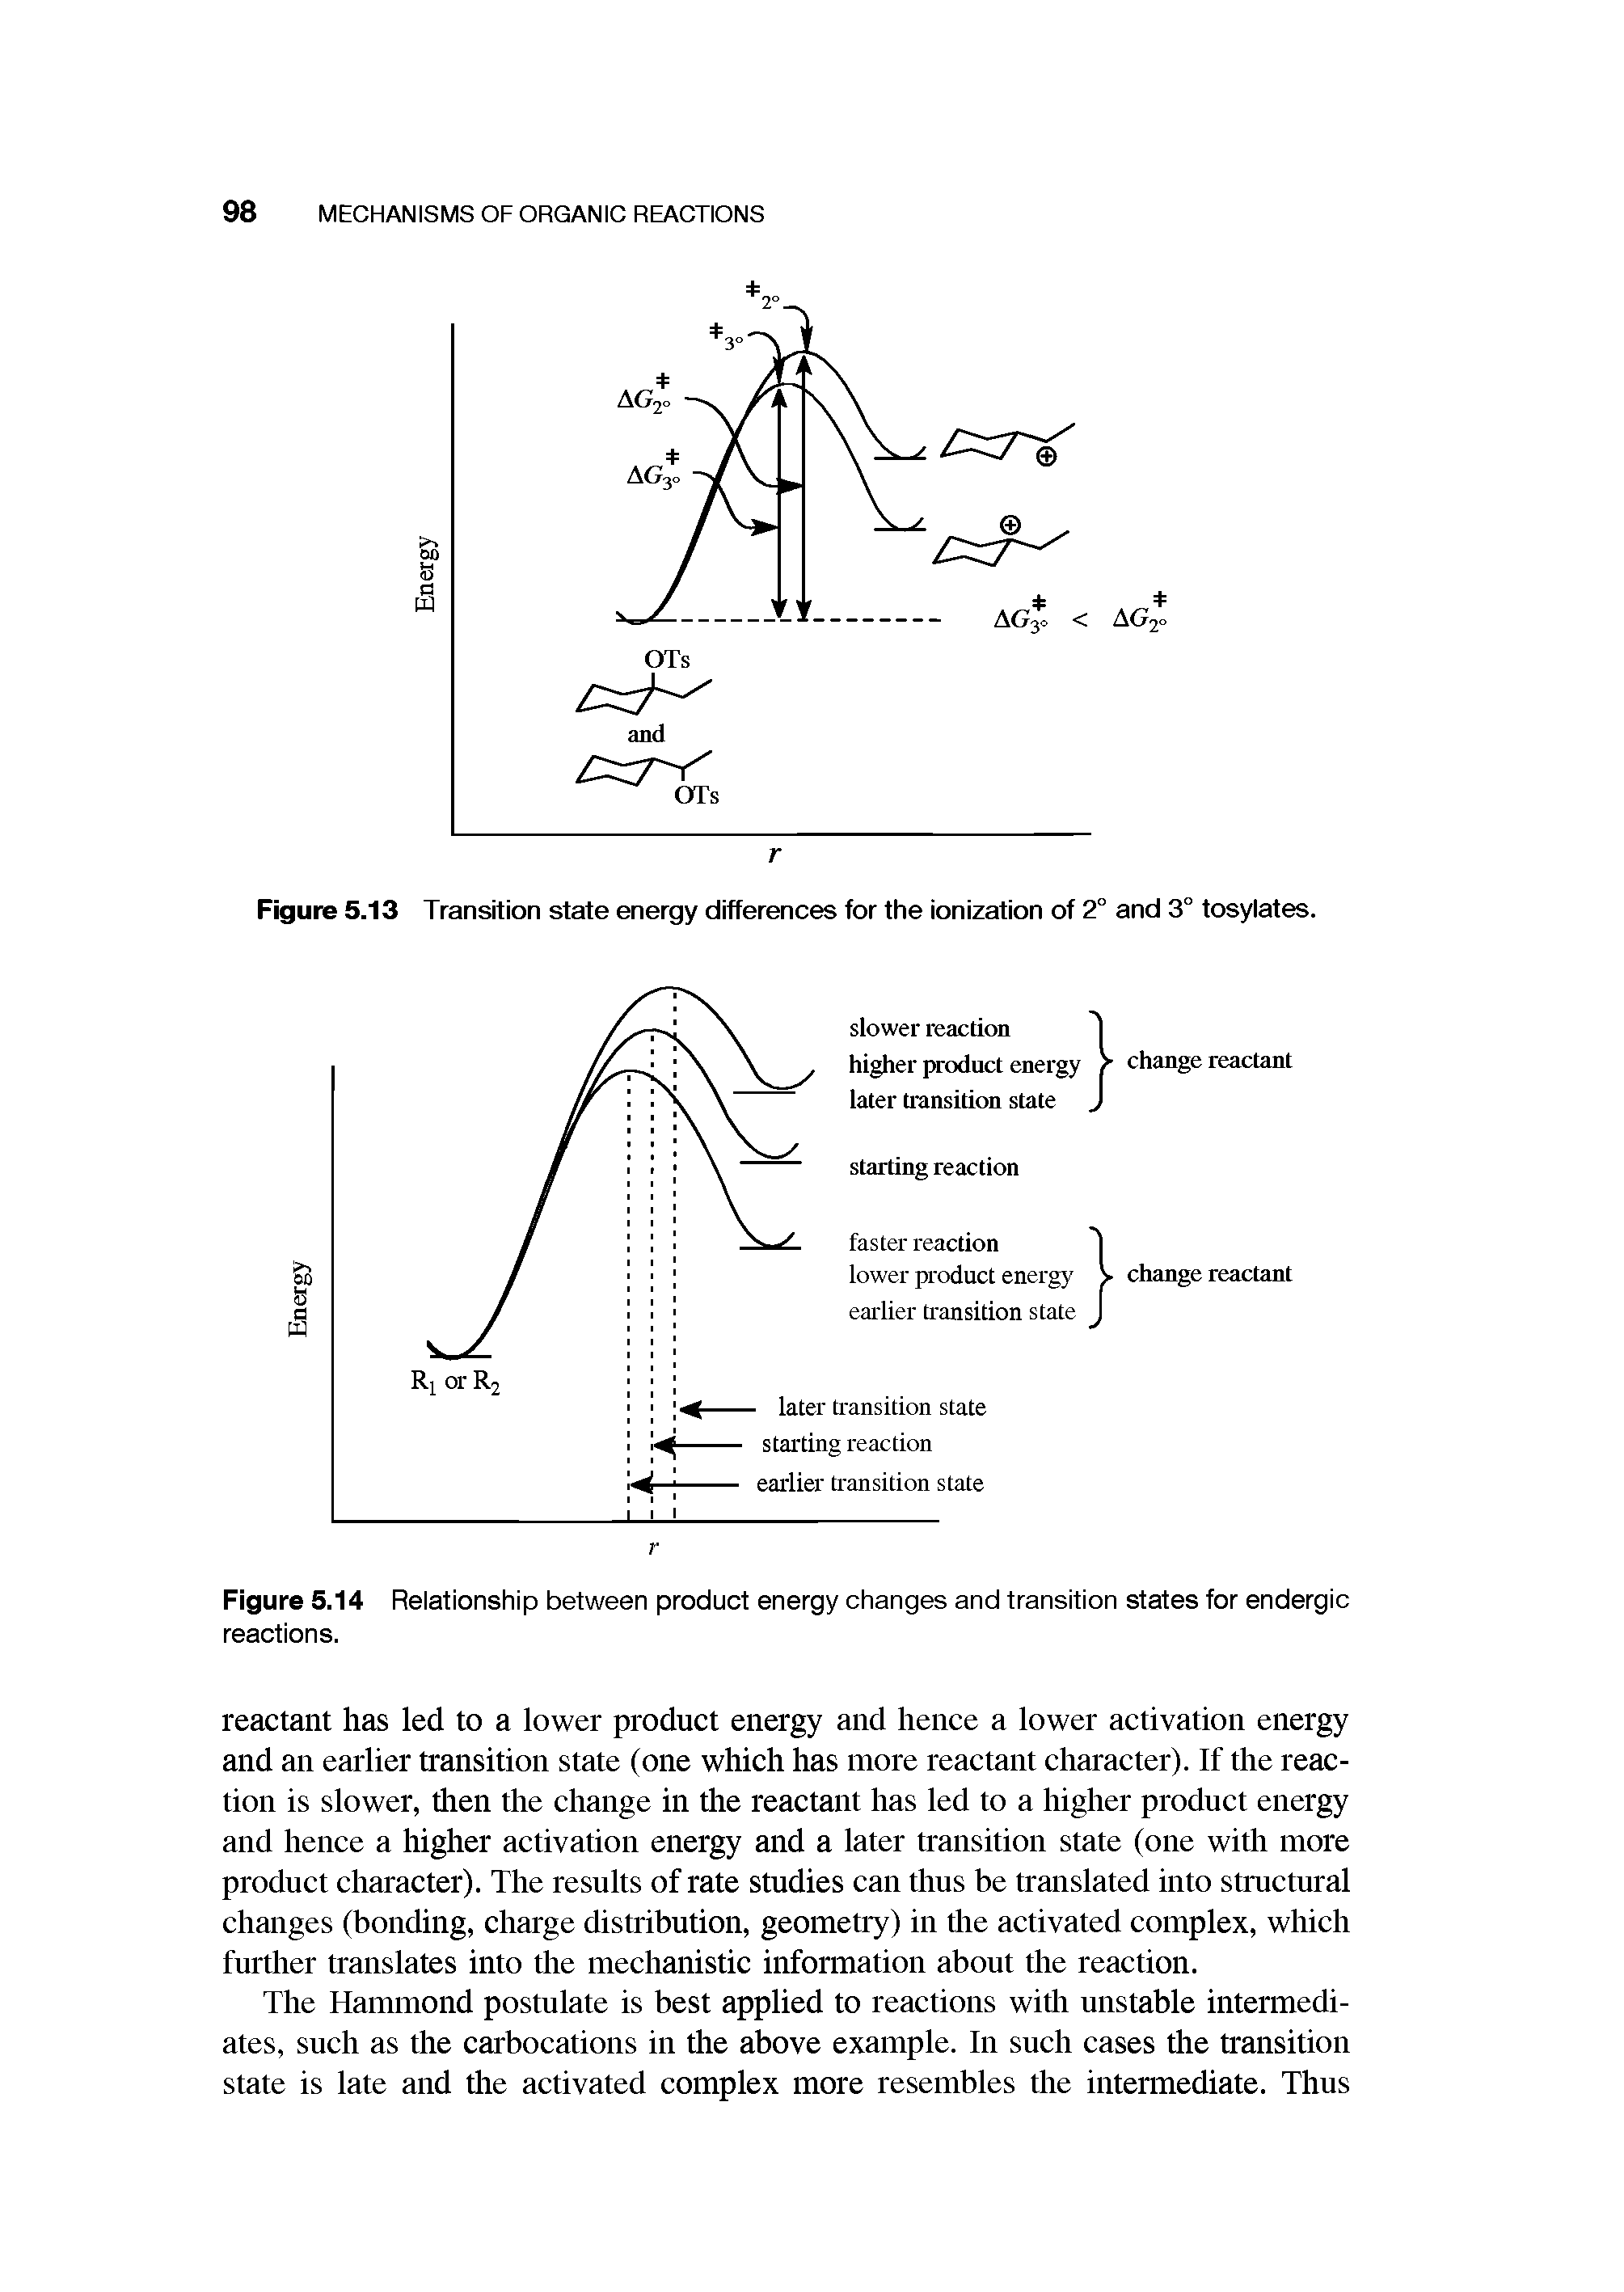 Figure 5.14 Relationship between product energy changes and transition states for endergic reactions.